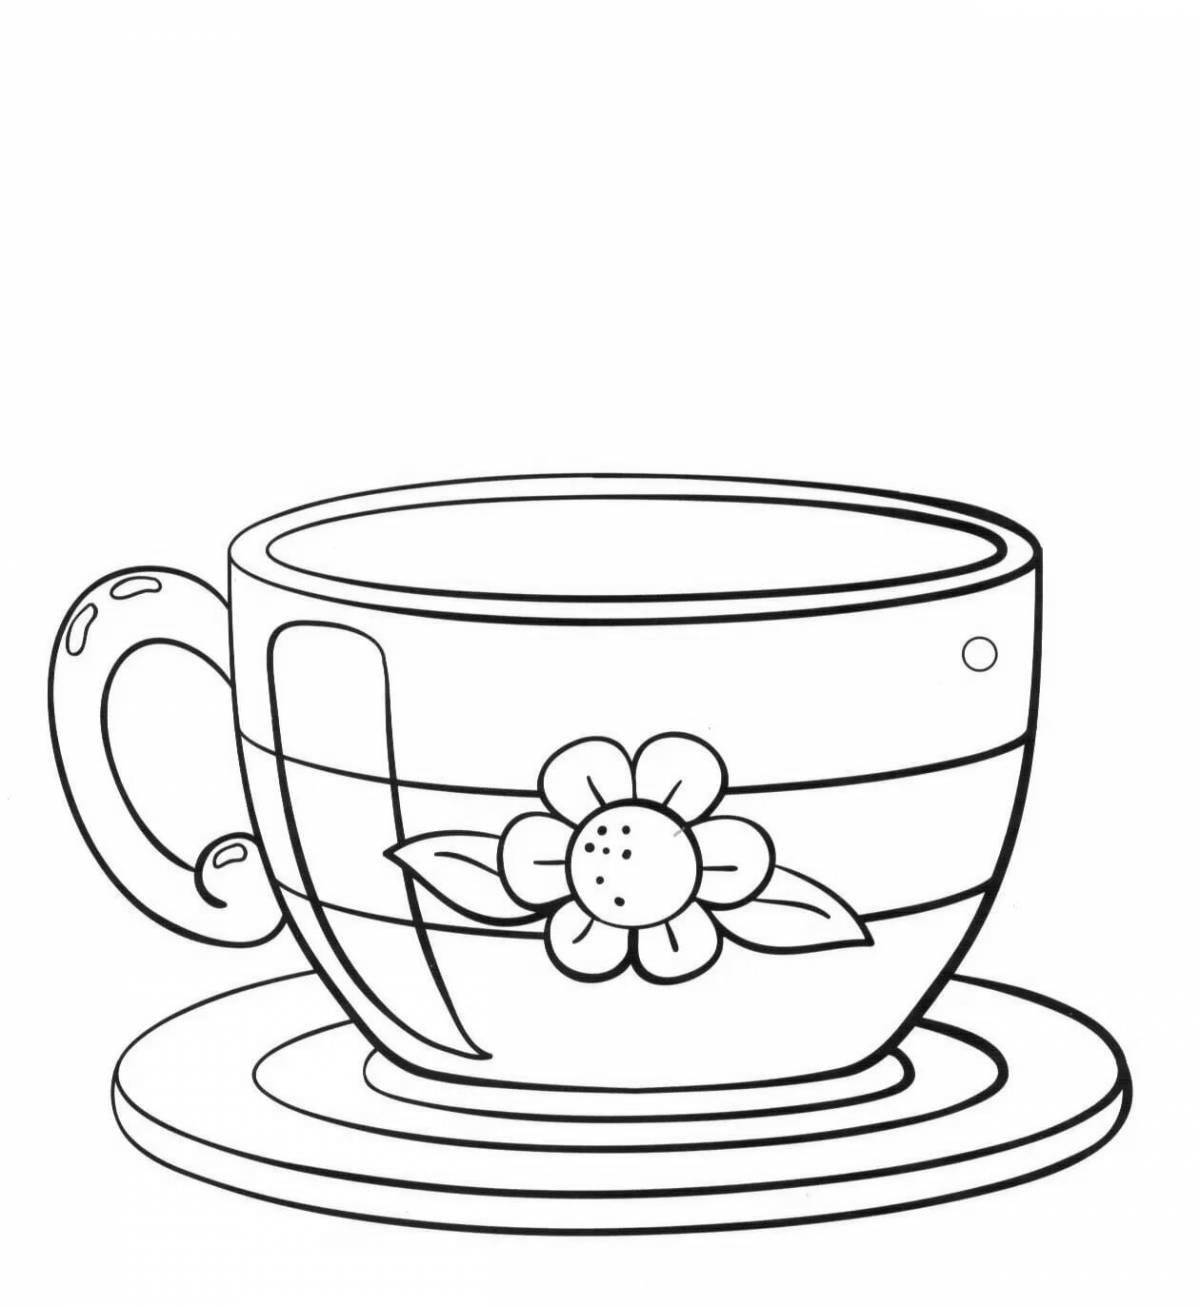 Glitter cup coloring page